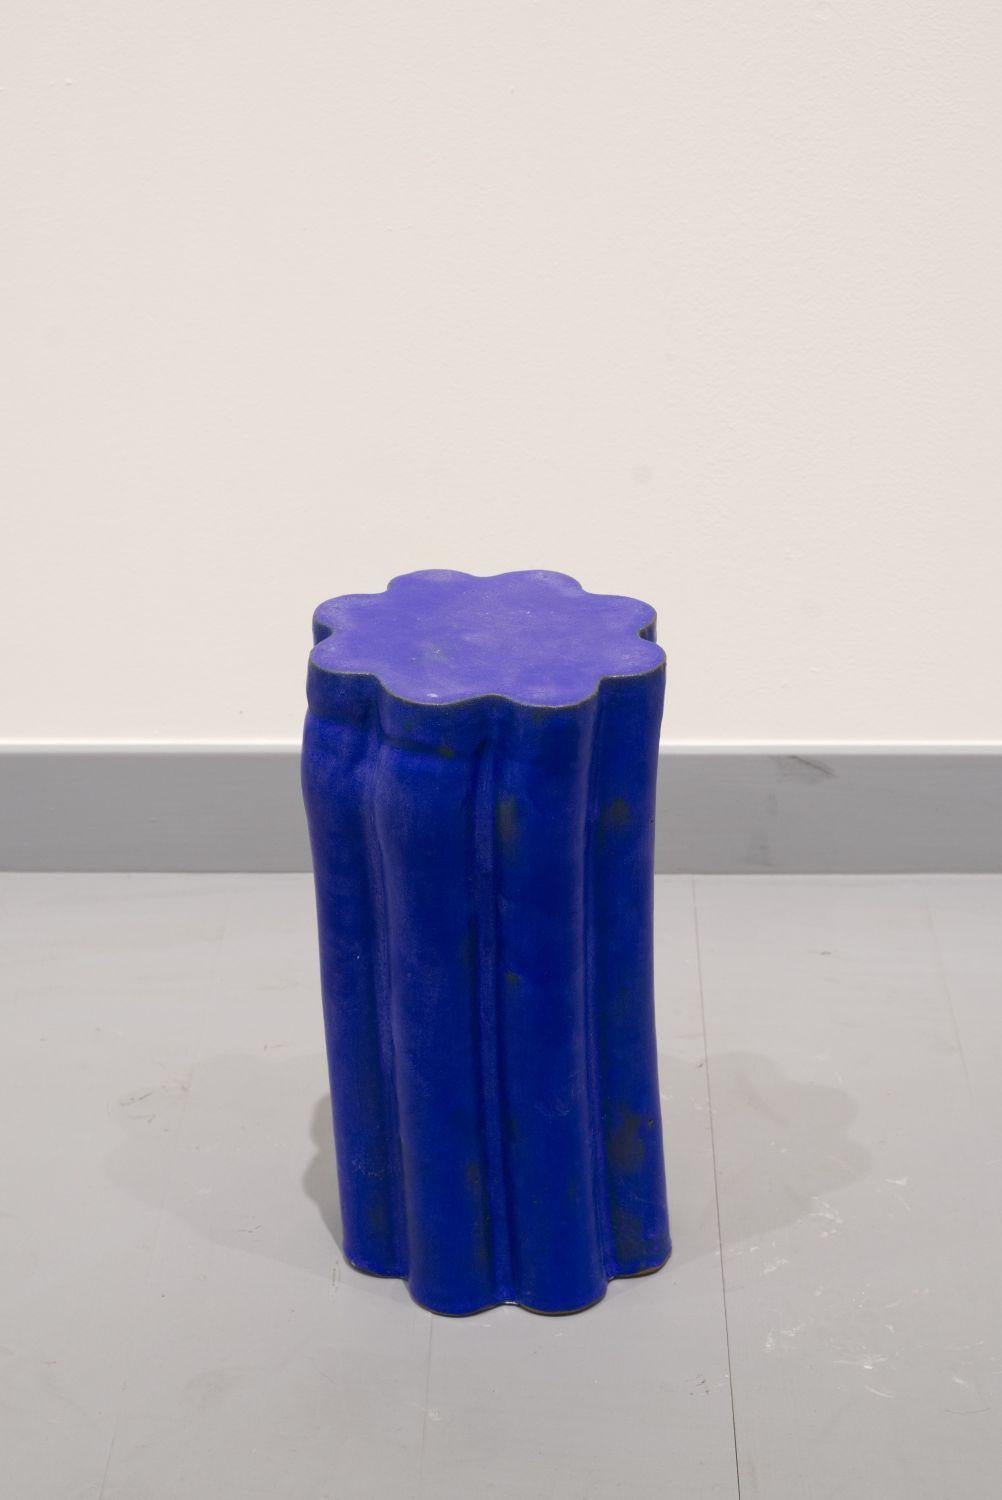 Small Pillar stool by Milan Pekar
Dimensions: d 15 x h 35 cm
Materials: Glaze, clay

handcrafted in the Czech Republic

Also Available: different colors and patterns,

Established own studio August 2009 – Focus mainly on porcelain,